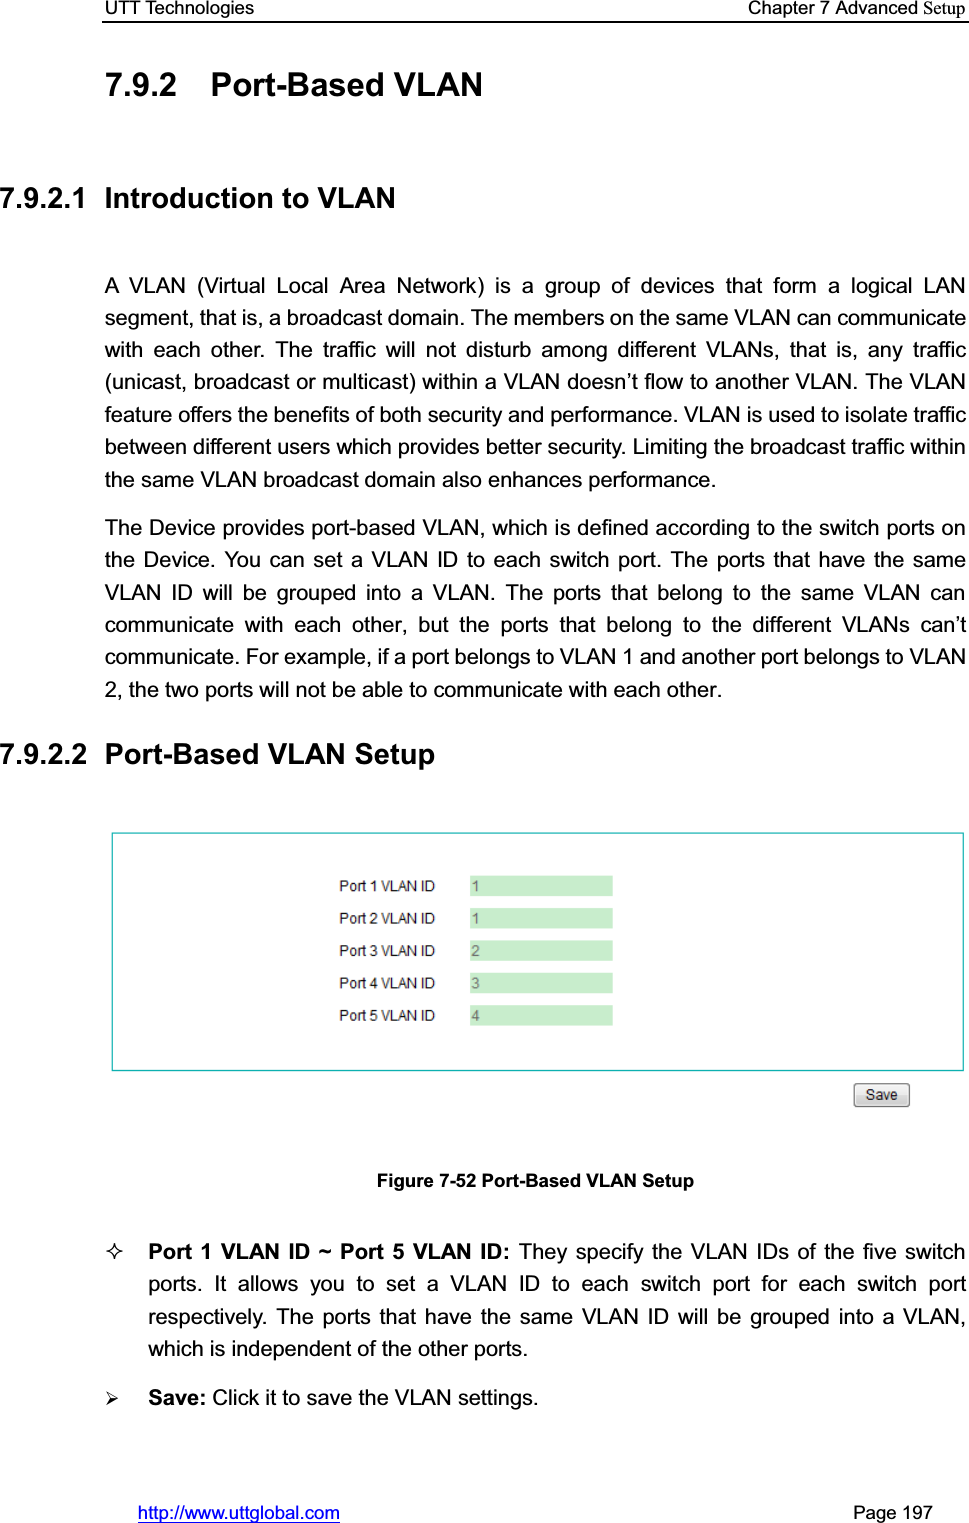 UTT Technologies    Chapter 7 Advanced Setuphttp://www.uttglobal.com                                                       Page 197 7.9.2 Port-Based VLAN  7.9.2.1  Introduction to VLAN A VLAN (Virtual Local Area Network) is a group of devices that form a logical LAN segment, that is, a broadcast domain. The members on the same VLAN can communicate with each other. The traffic will not disturb among different VLANs, that is, any traffic (unicast, broadcast or multicast) within a VLAN doesn¶t flow to another VLAN. The VLAN feature offers the benefits of both security and performance. VLAN is used to isolate traffic between different users which provides better security. Limiting the broadcast traffic within the same VLAN broadcast domain also enhances performance. The Device provides port-based VLAN, which is defined according to the switch ports on the Device. You can set a VLAN ID to each switch port. The ports that have the same VLAN ID will be grouped into a VLAN. The ports that belong to the same VLAN can communicate with each other, but the ports that belong to the different VLANV FDQ¶tcommunicate. For example, if a port belongs to VLAN 1 and another port belongs to VLAN 2, the two ports will not be able to communicate with each other. 7.9.2.2 Port-Based VLAN Setup Figure 7-52 Port-Based VLAN Setup Port 1 VLAN ID ~ Port 5 VLAN ID: They specify the VLAN IDs of the five switch ports. It allows you to set a VLAN ID to each switch port for each switch port respectively. The ports that have the same VLAN ID will be grouped into a VLAN, which is independent of the other ports. ¾Save: Click it to save the VLAN settings.